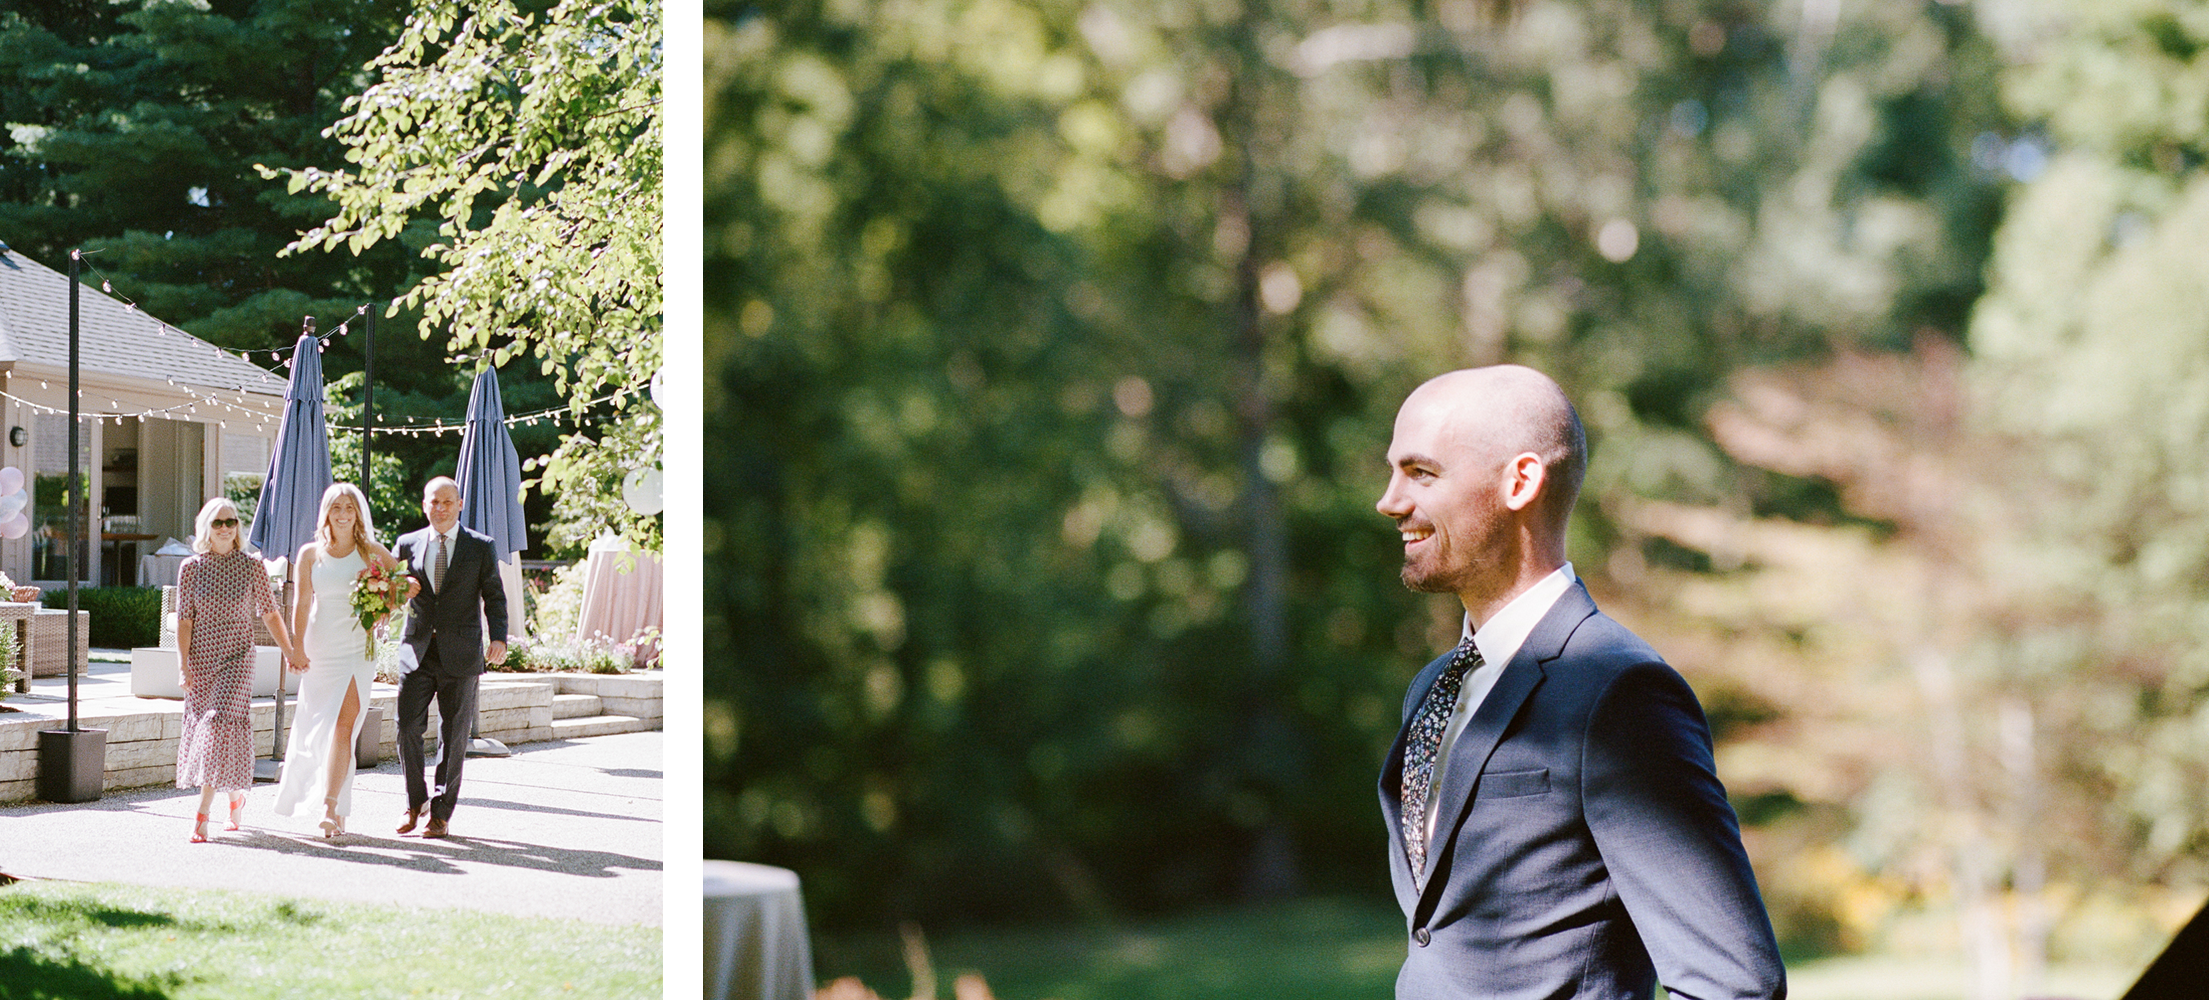 Backyard-Elopement-on-Film-Analog-Pool-Party-29.PNG